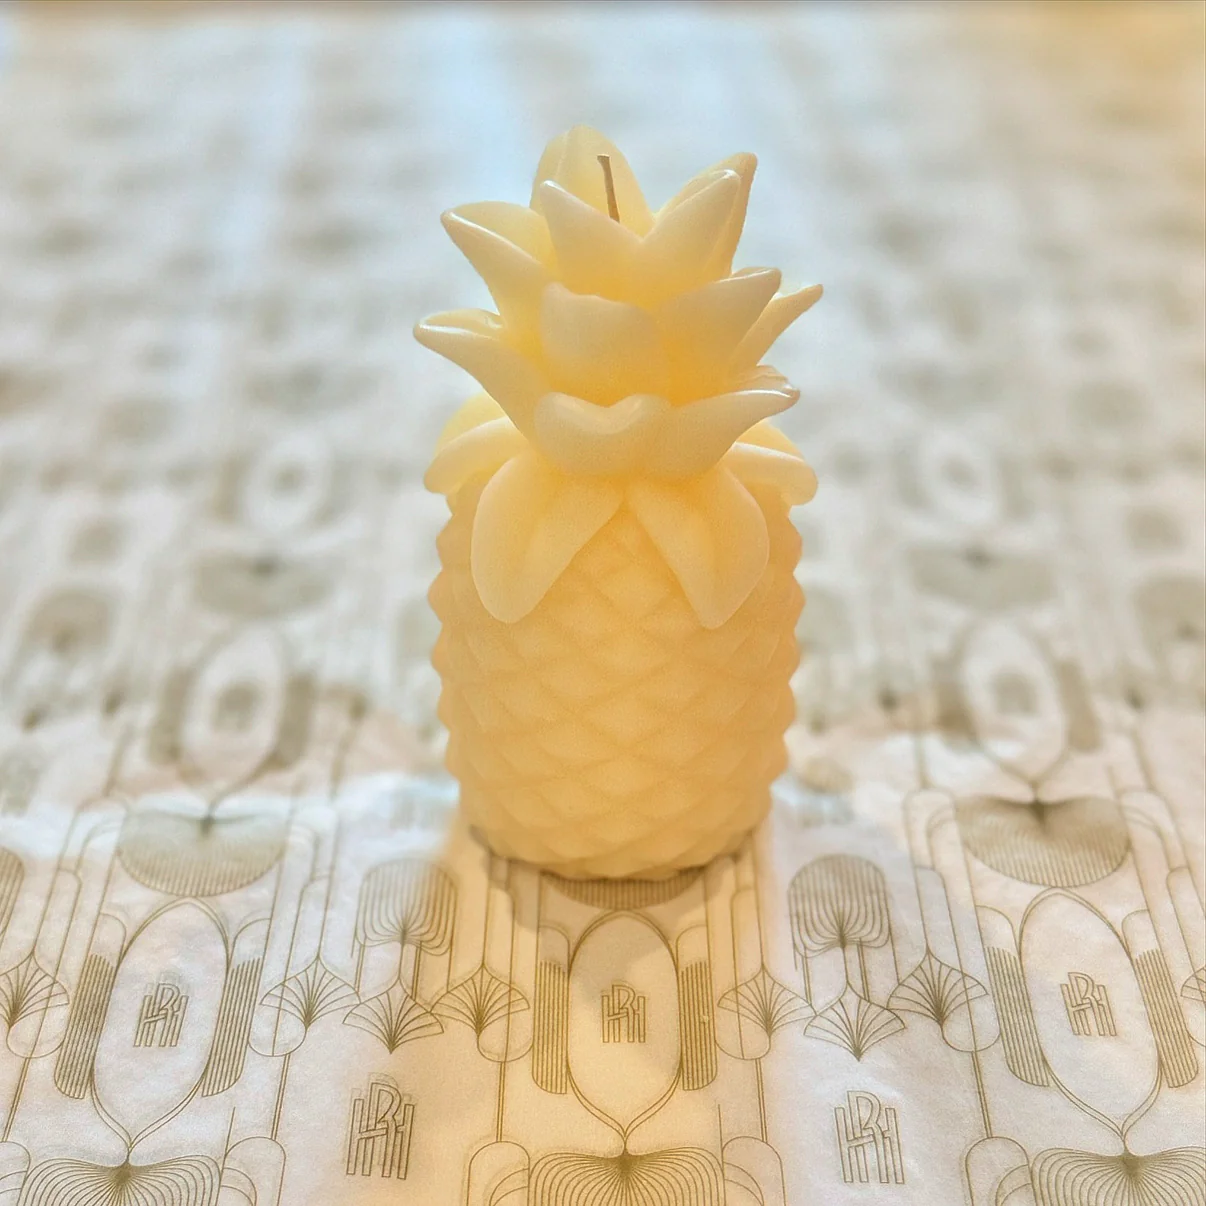 pinapple candle from Rox Hill Candle Co.